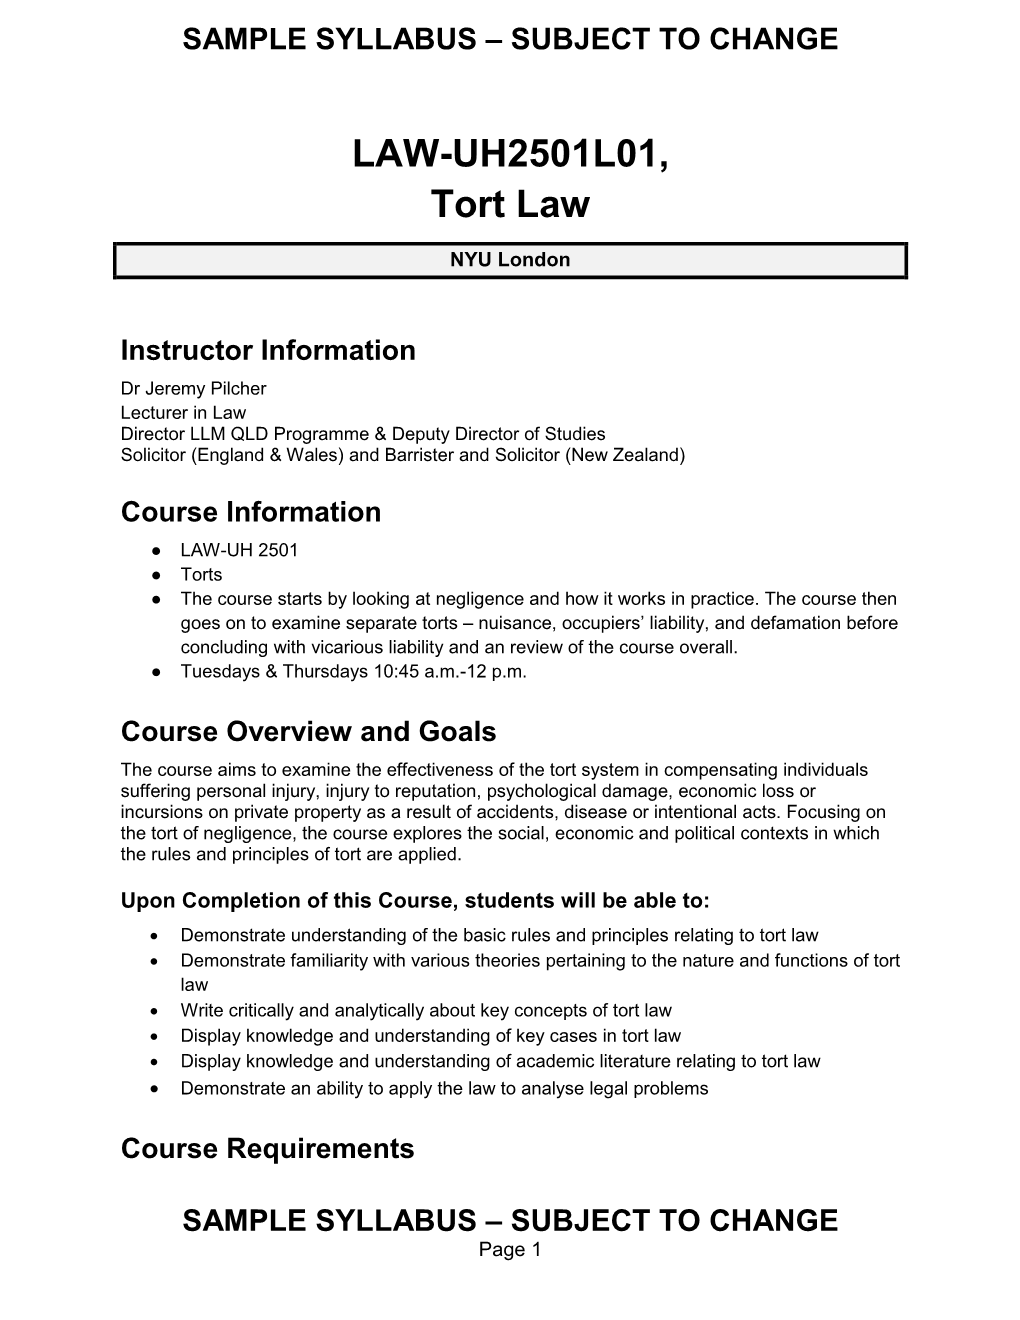 Torts ● the Course Starts by Looking at Negligence and How It Works in Practice